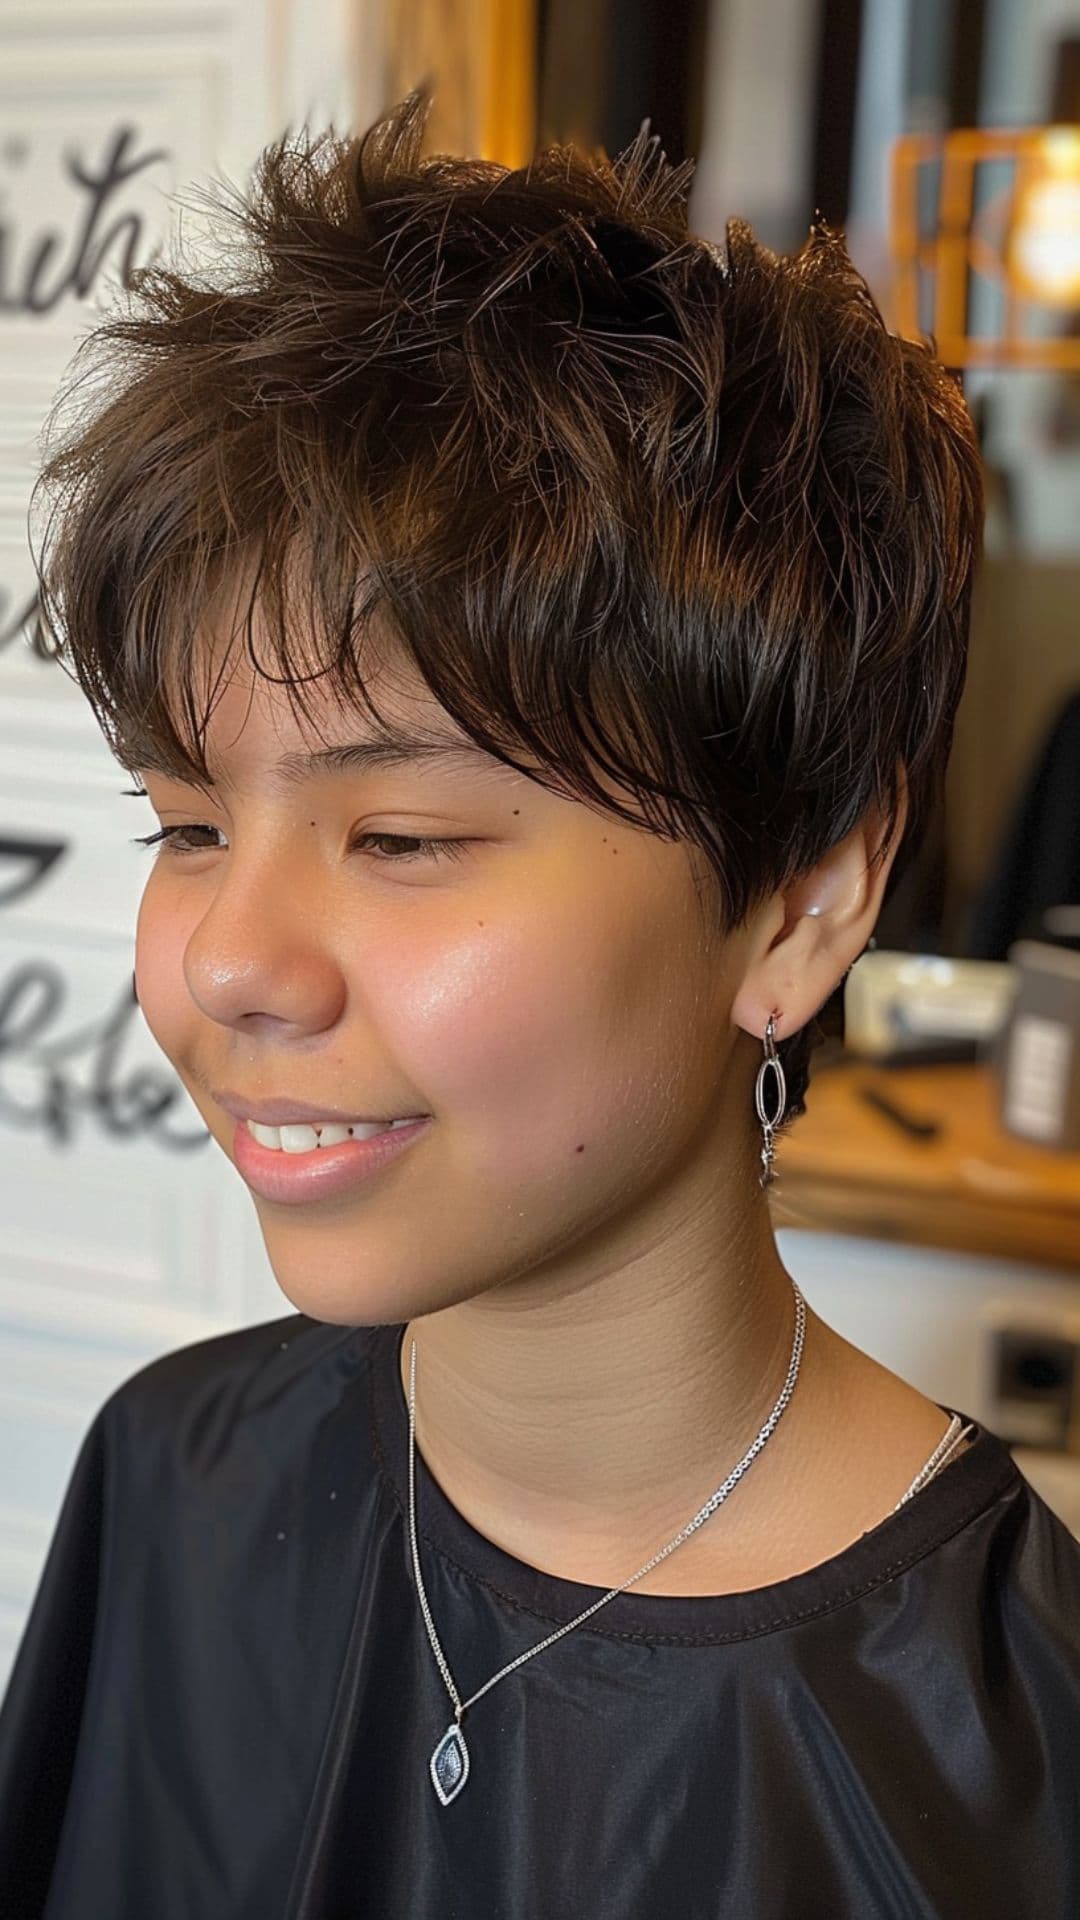 A woman modelling a feathered pixie cut.